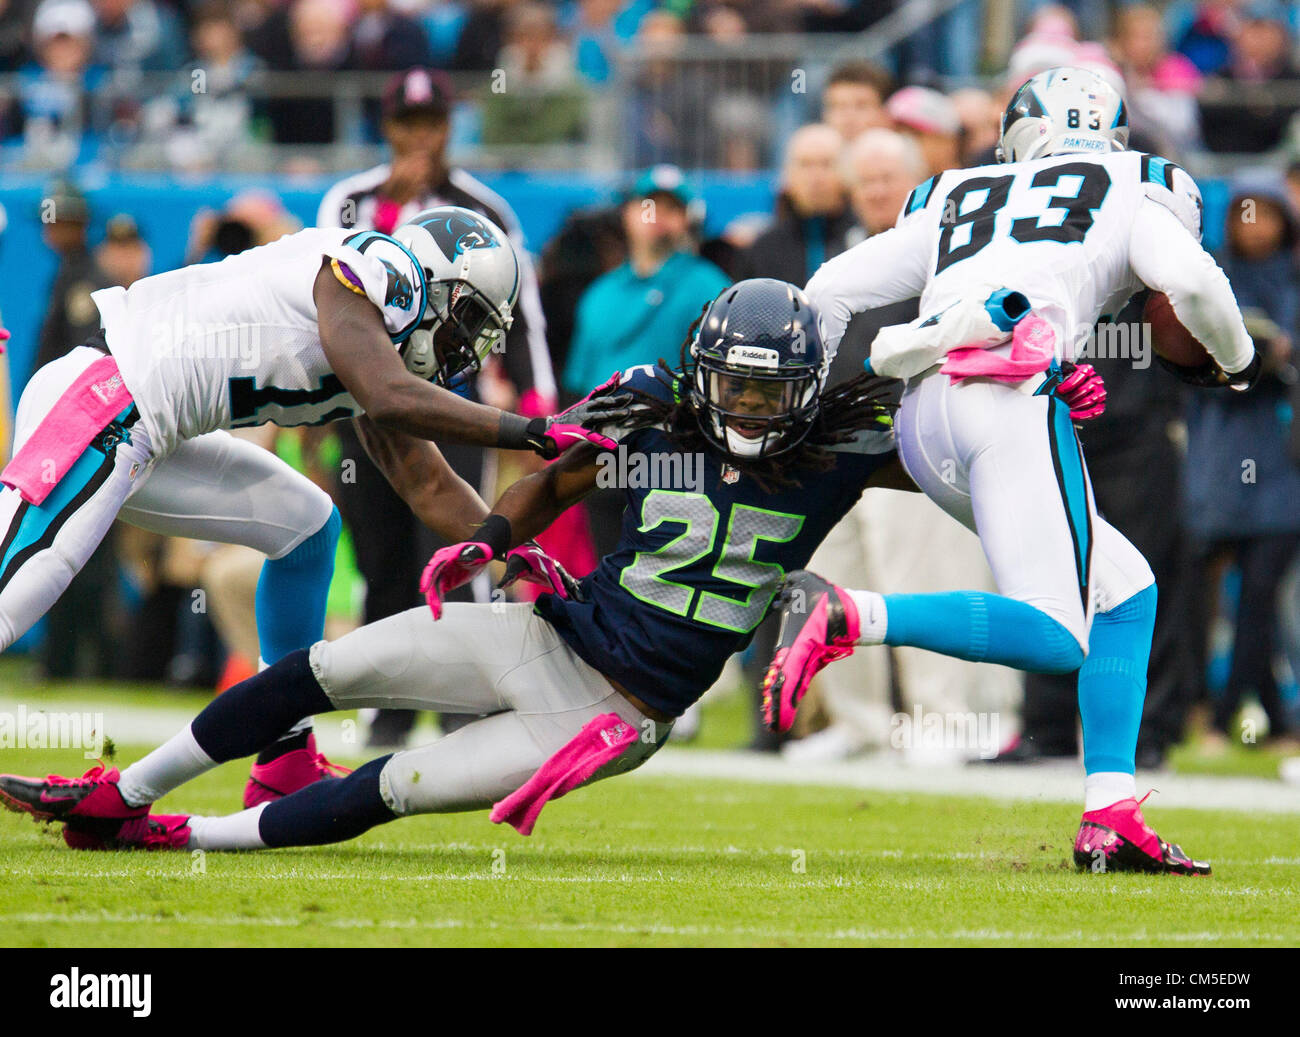 Oct. 07, 2012 - Charlotte, North Carolina, U.S. - Seahawks CB RICHARD SHERMAN (25) fighting off a block and making a tackle on Panthers WR LOUIS MURPHY (83) during the Panthers vs. Seahawks game at Bank of America Stadium. (Credit Image: © Anantachai Brown/ZUMAPRESS.com) Stock Photo